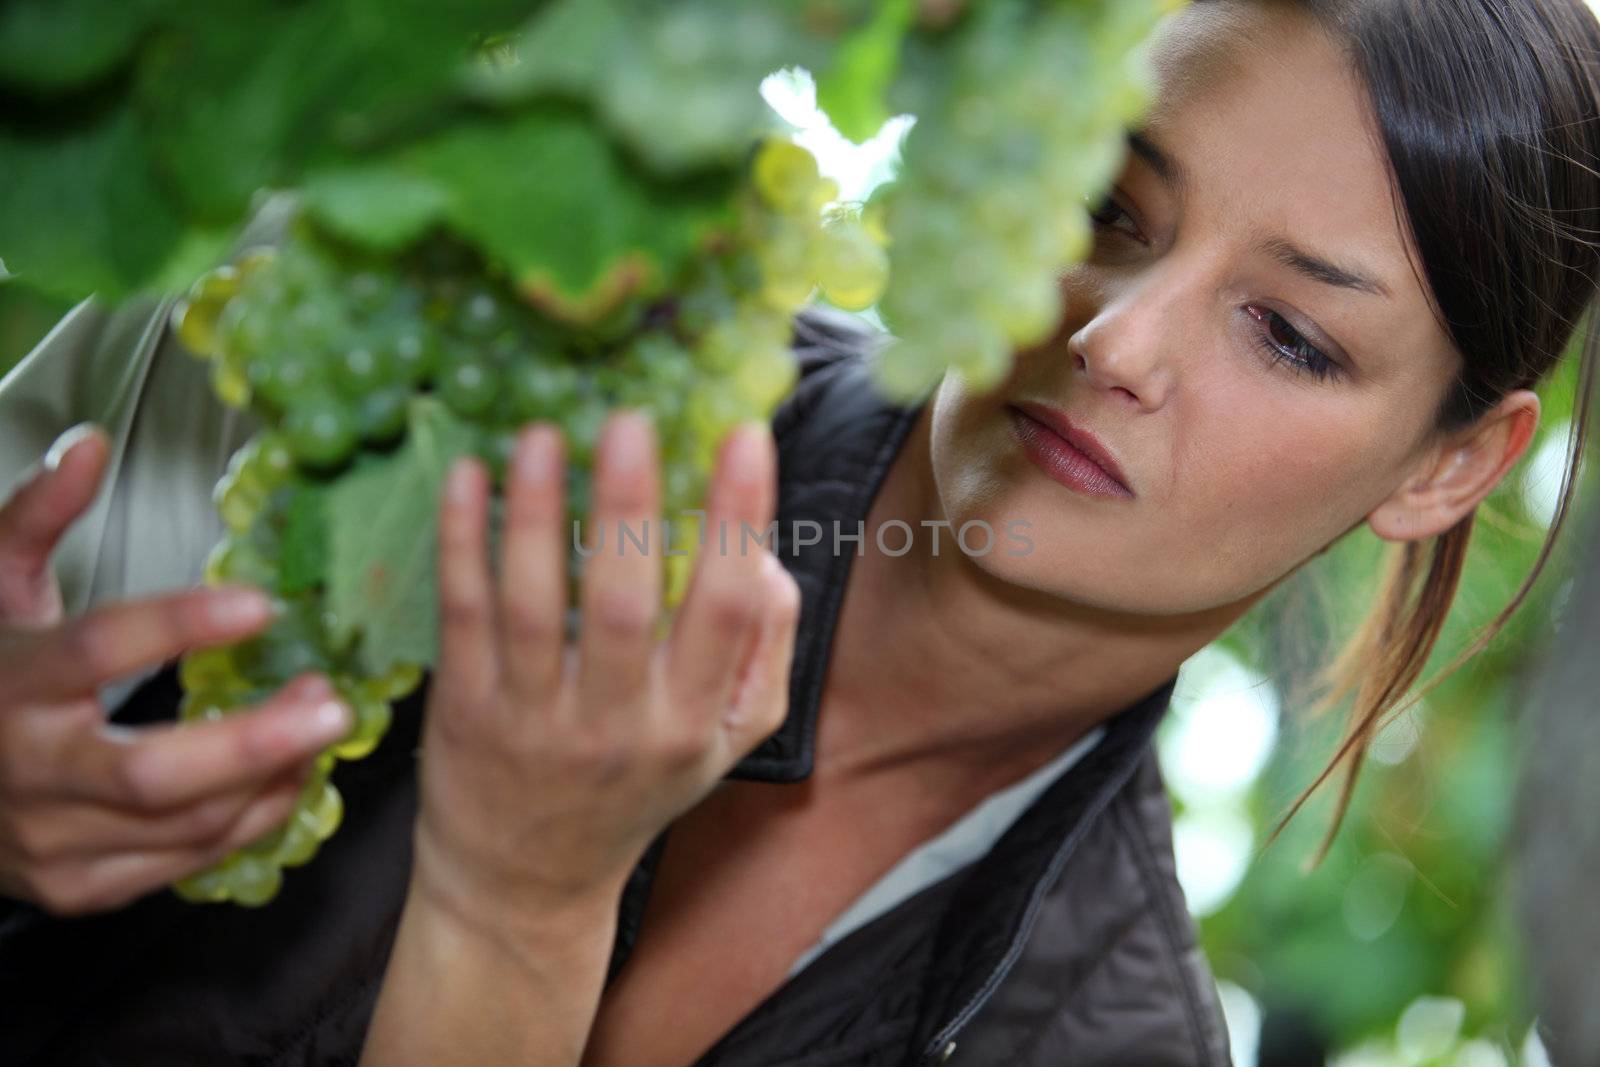 Woman inspecting green grapes in a vineyard by phovoir